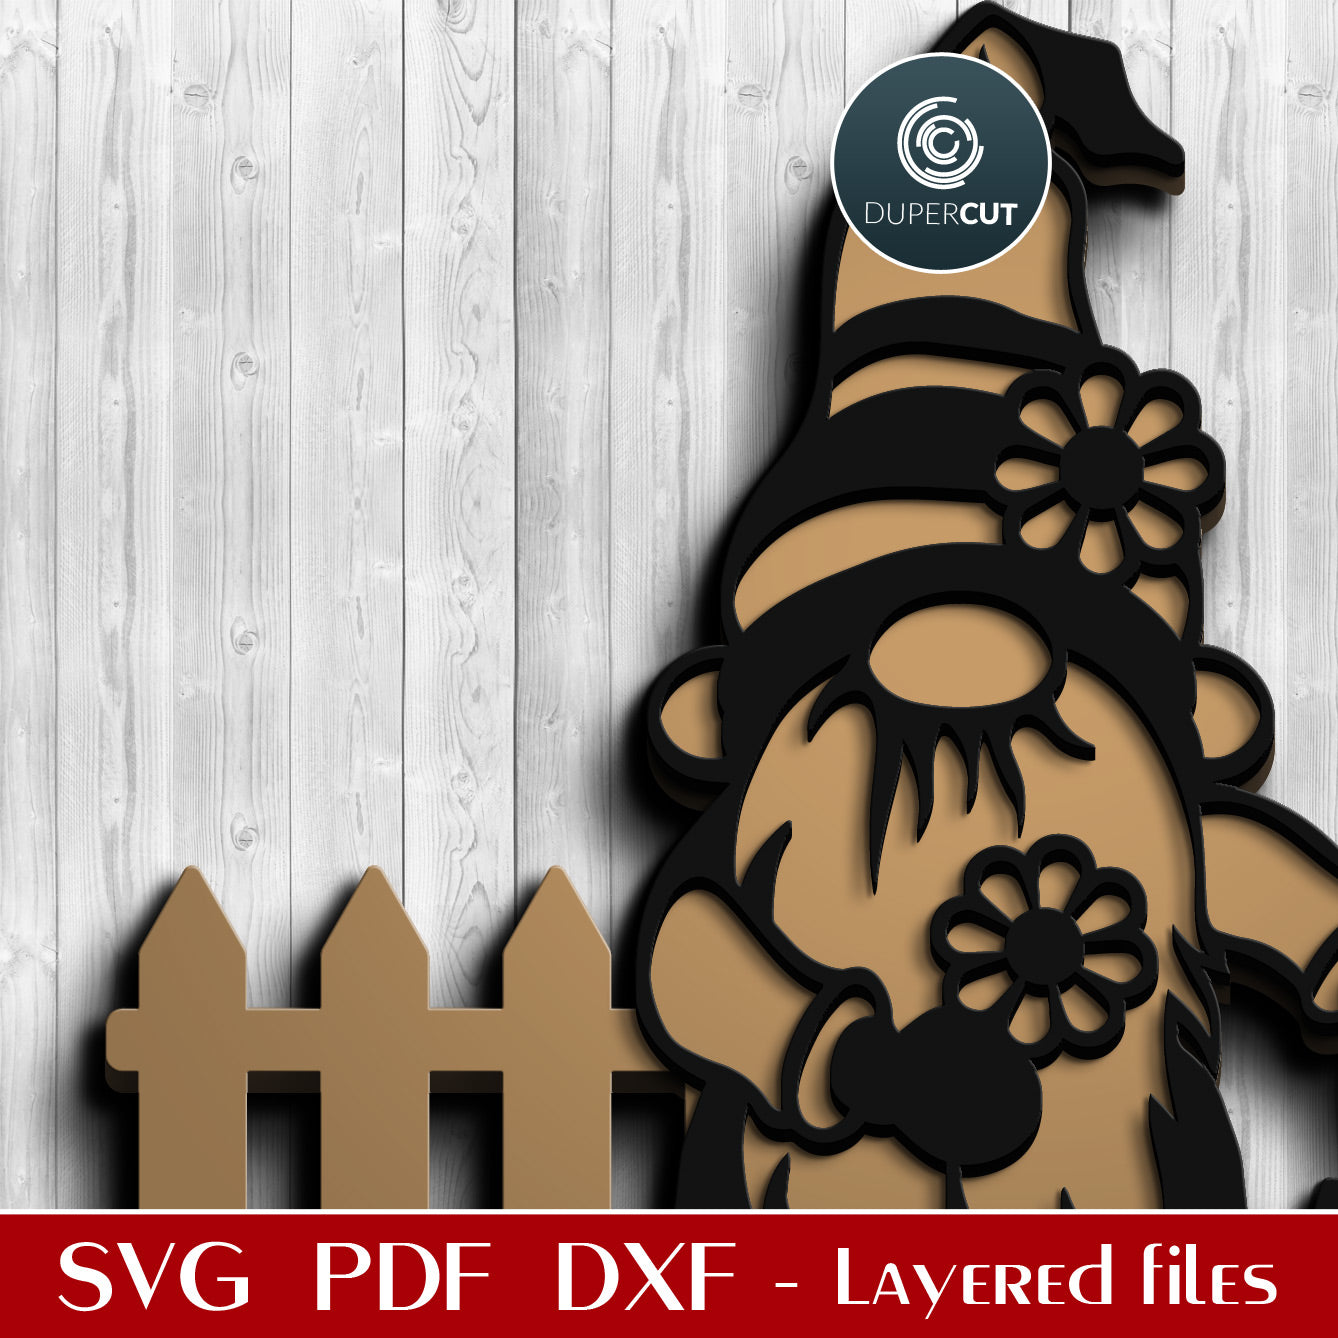 Garden gnome DIY spring yard decor - SVG DXF layered cutting files for Glowforge, Cricut, Silhouette cameo, CNC pattern by DuperCut.com